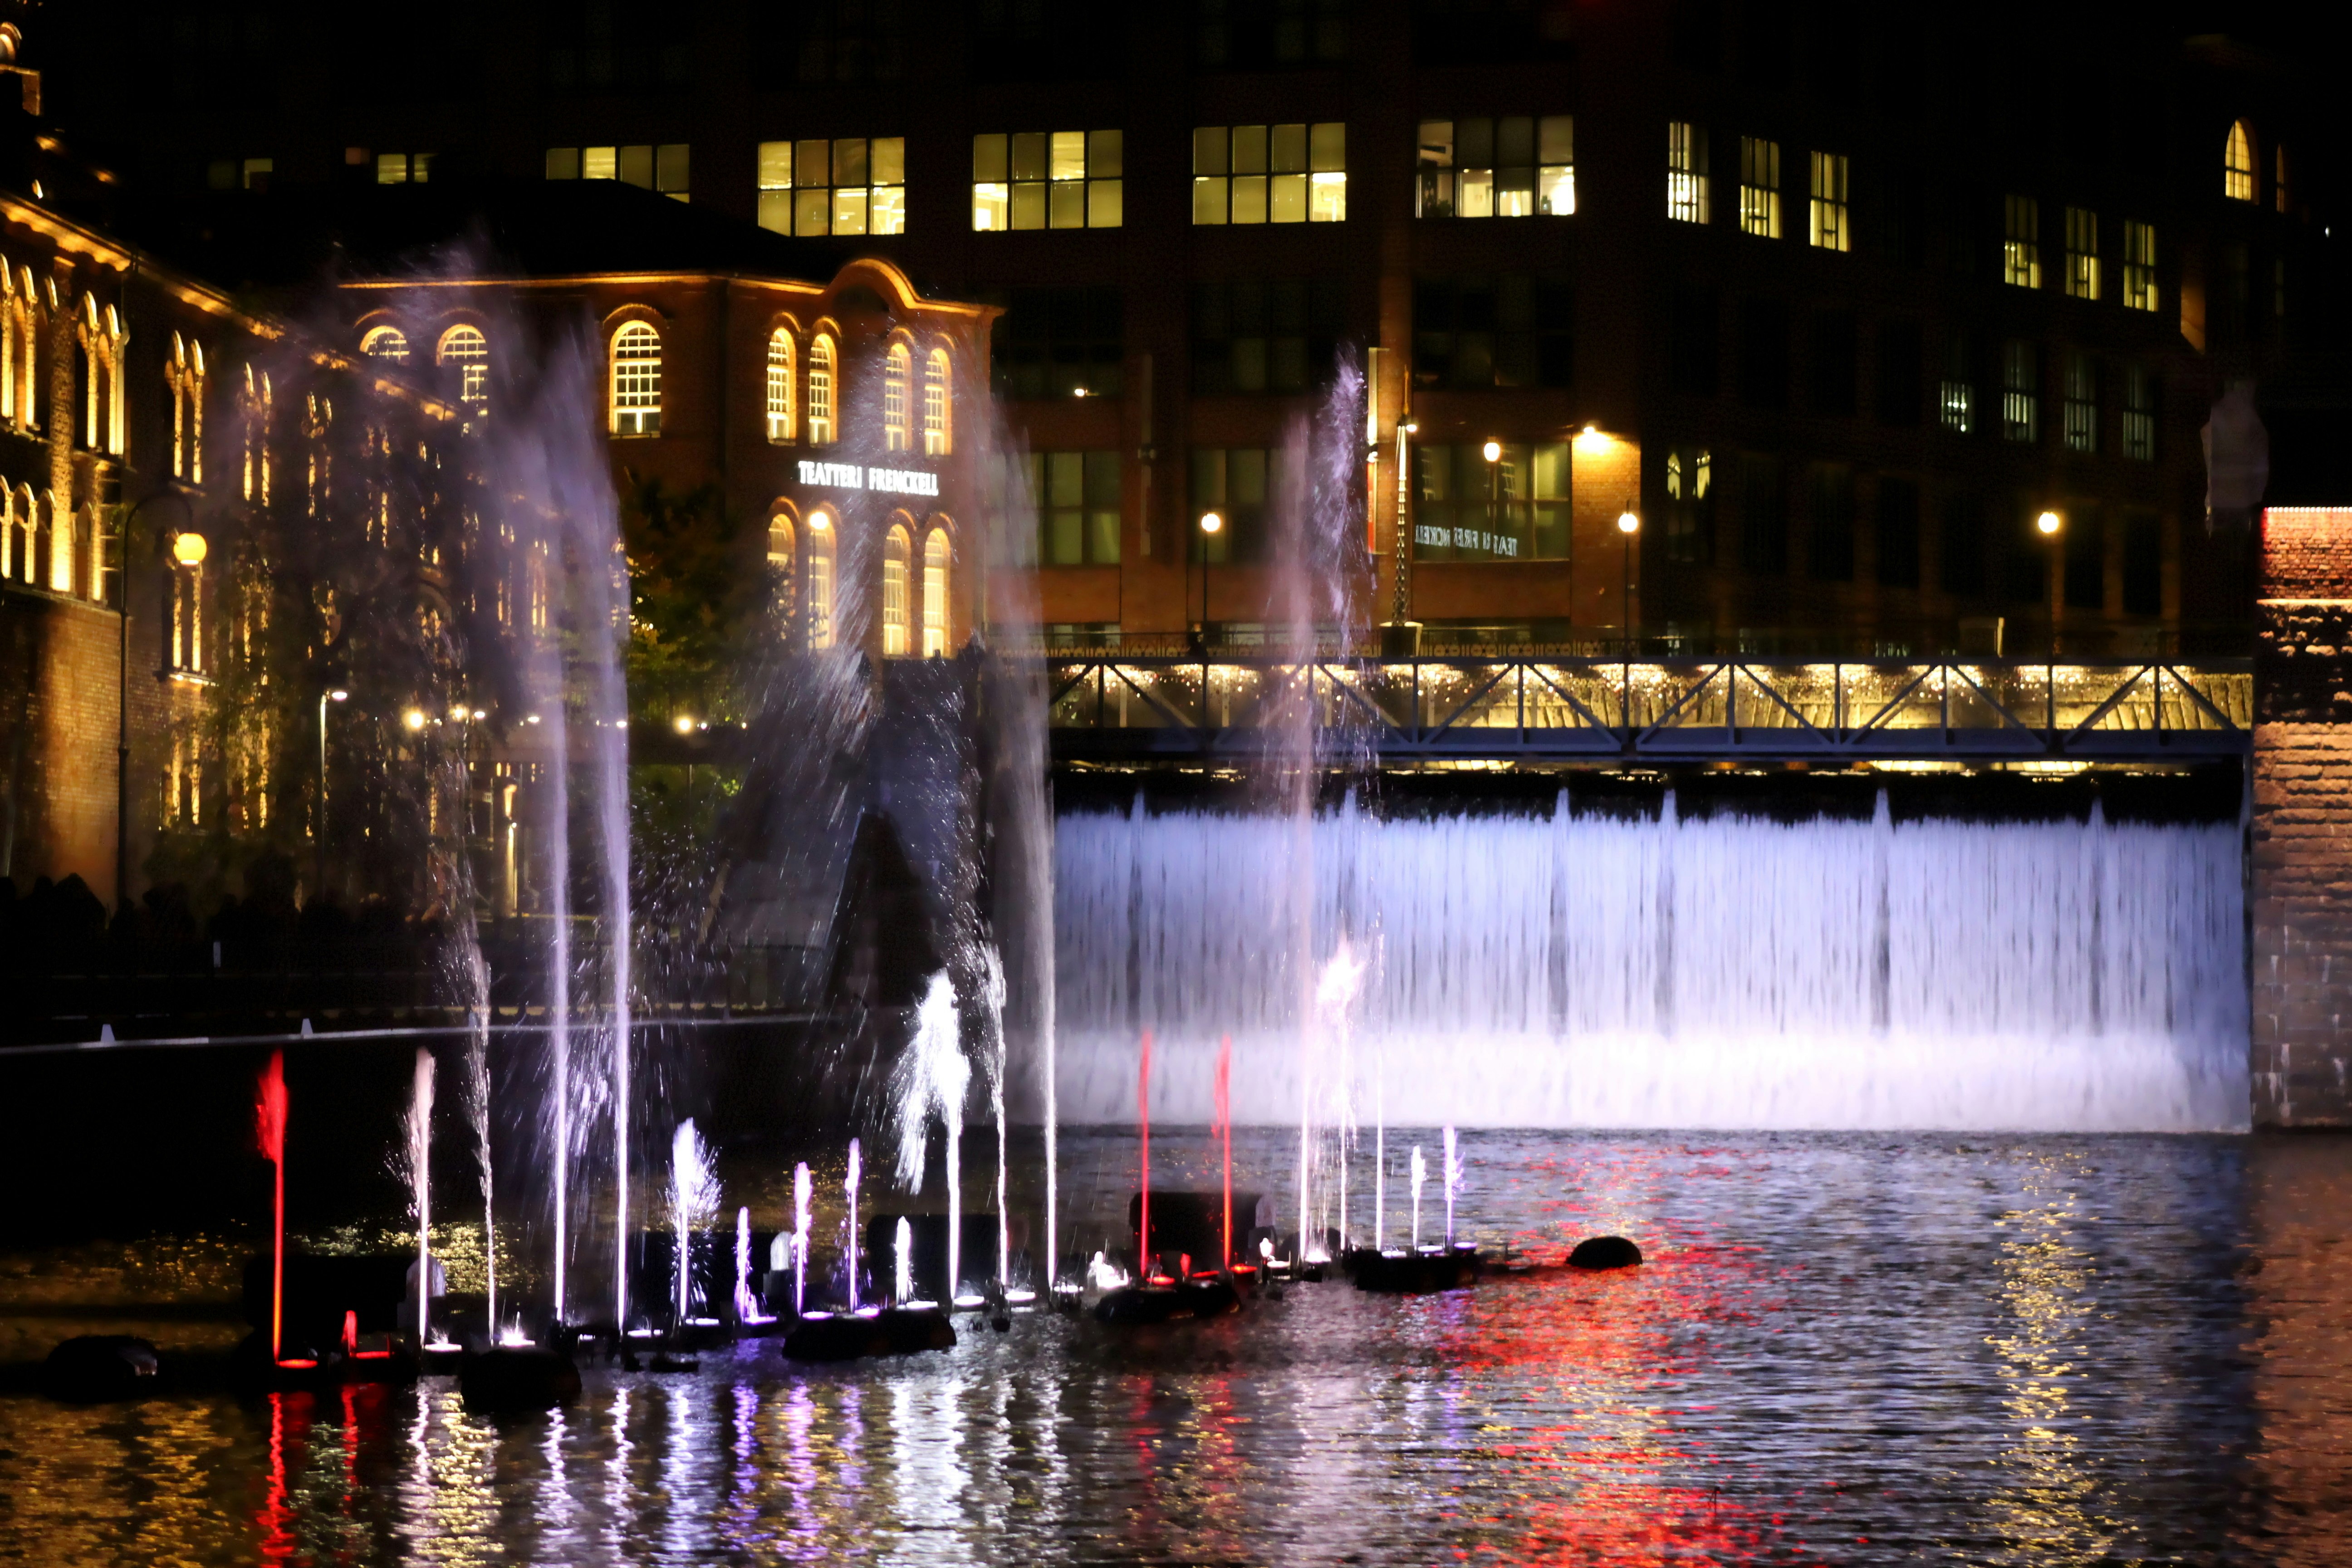 outdoor water fountain during nighttime